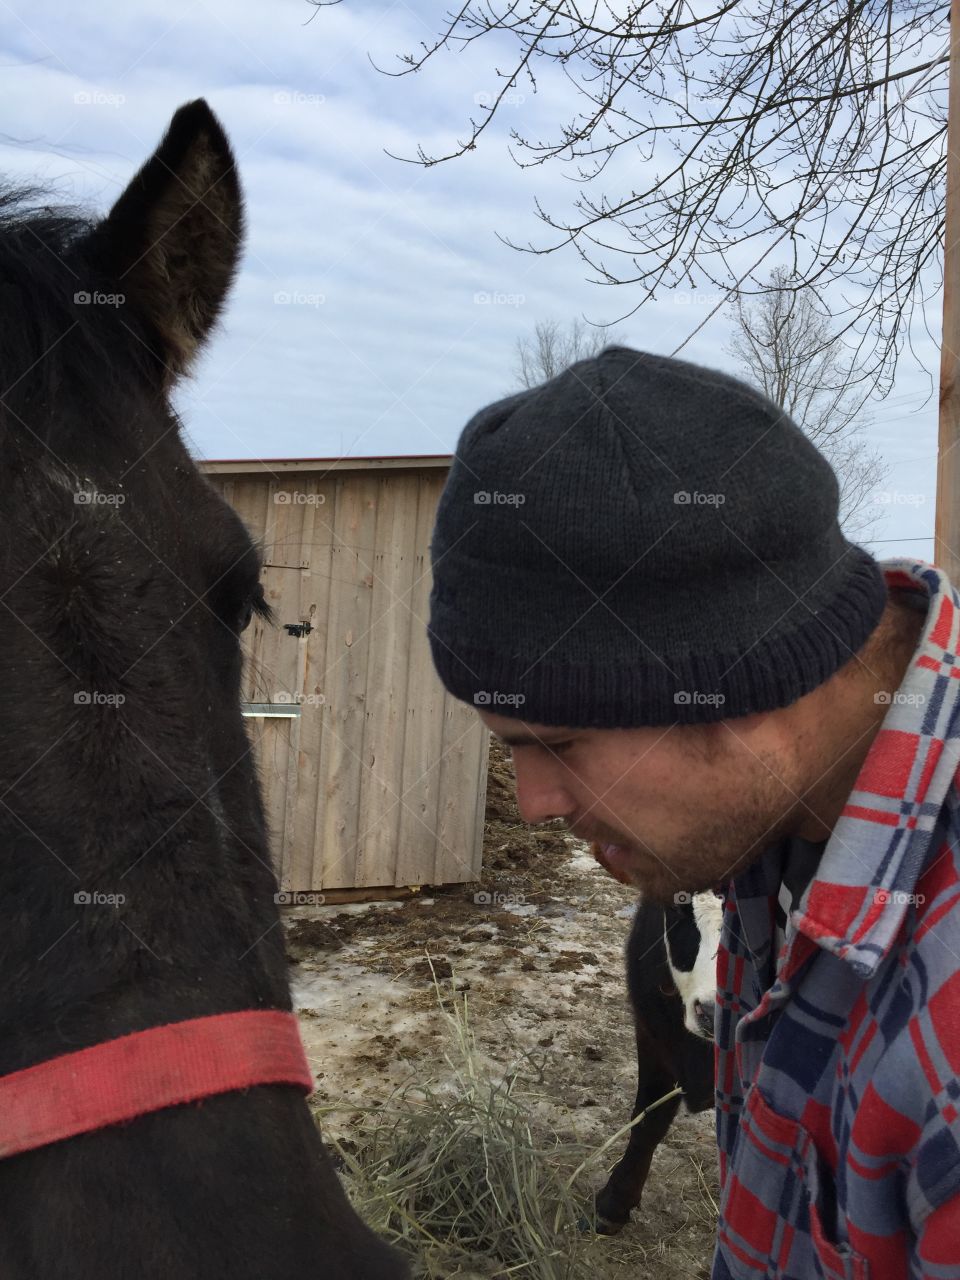 Just talking about sweet nothings to the horse and she soaks it all in chance  loves affection.